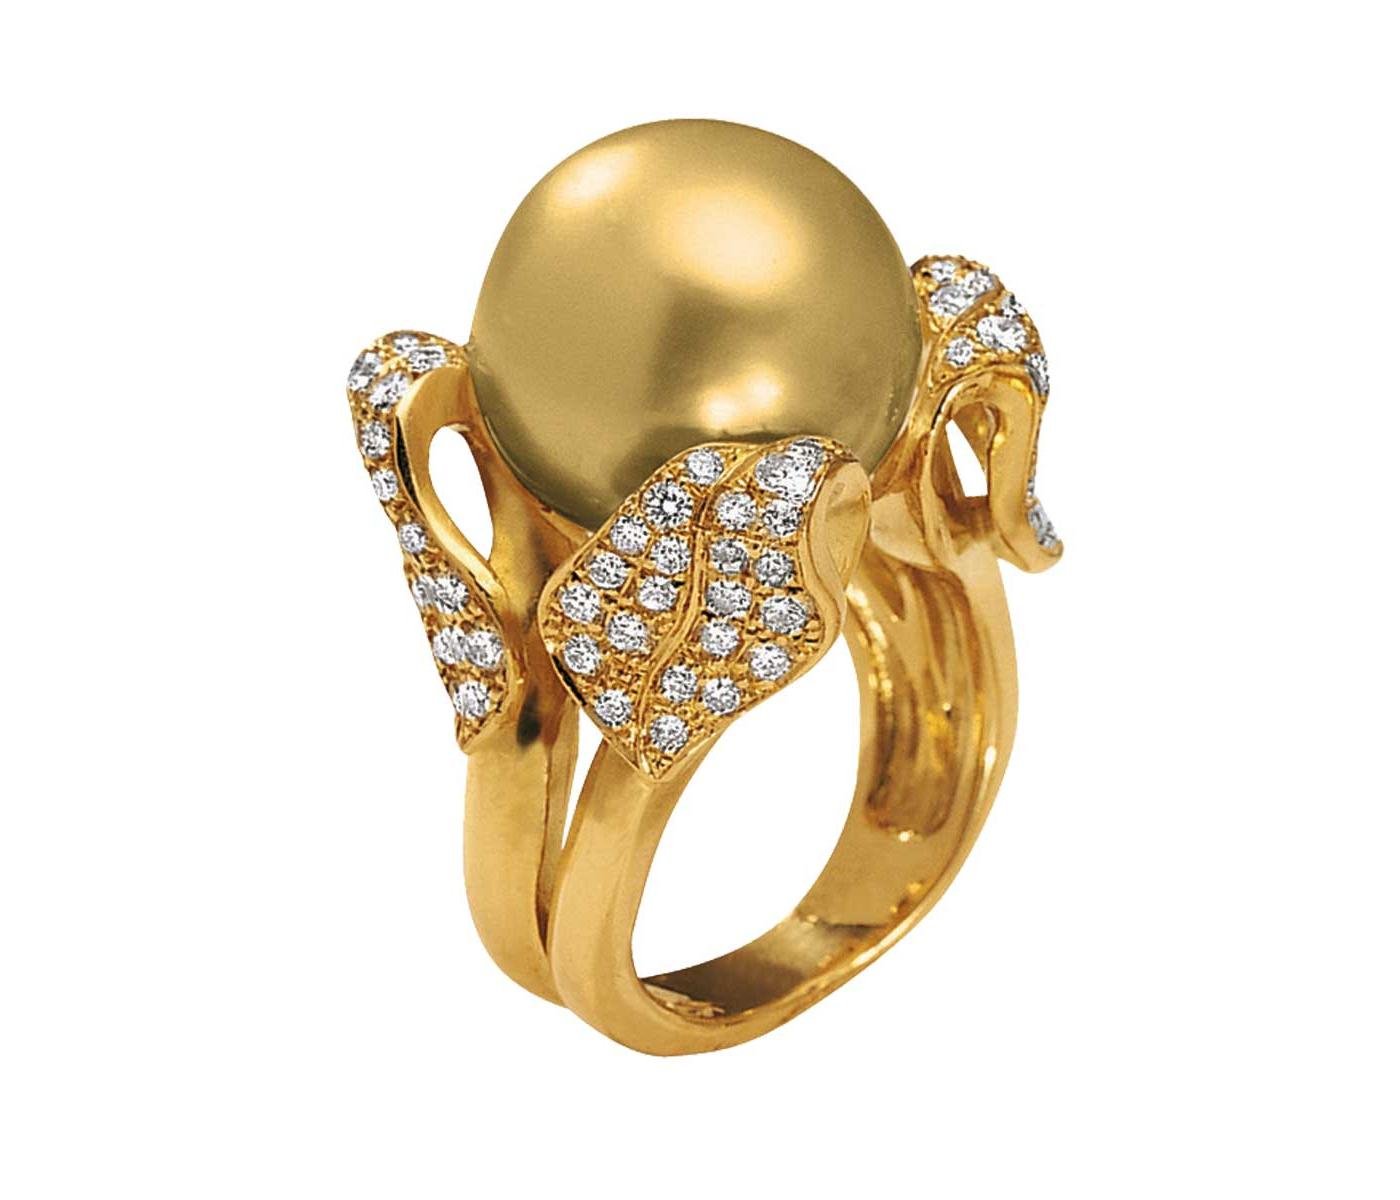 Ring by Porchet